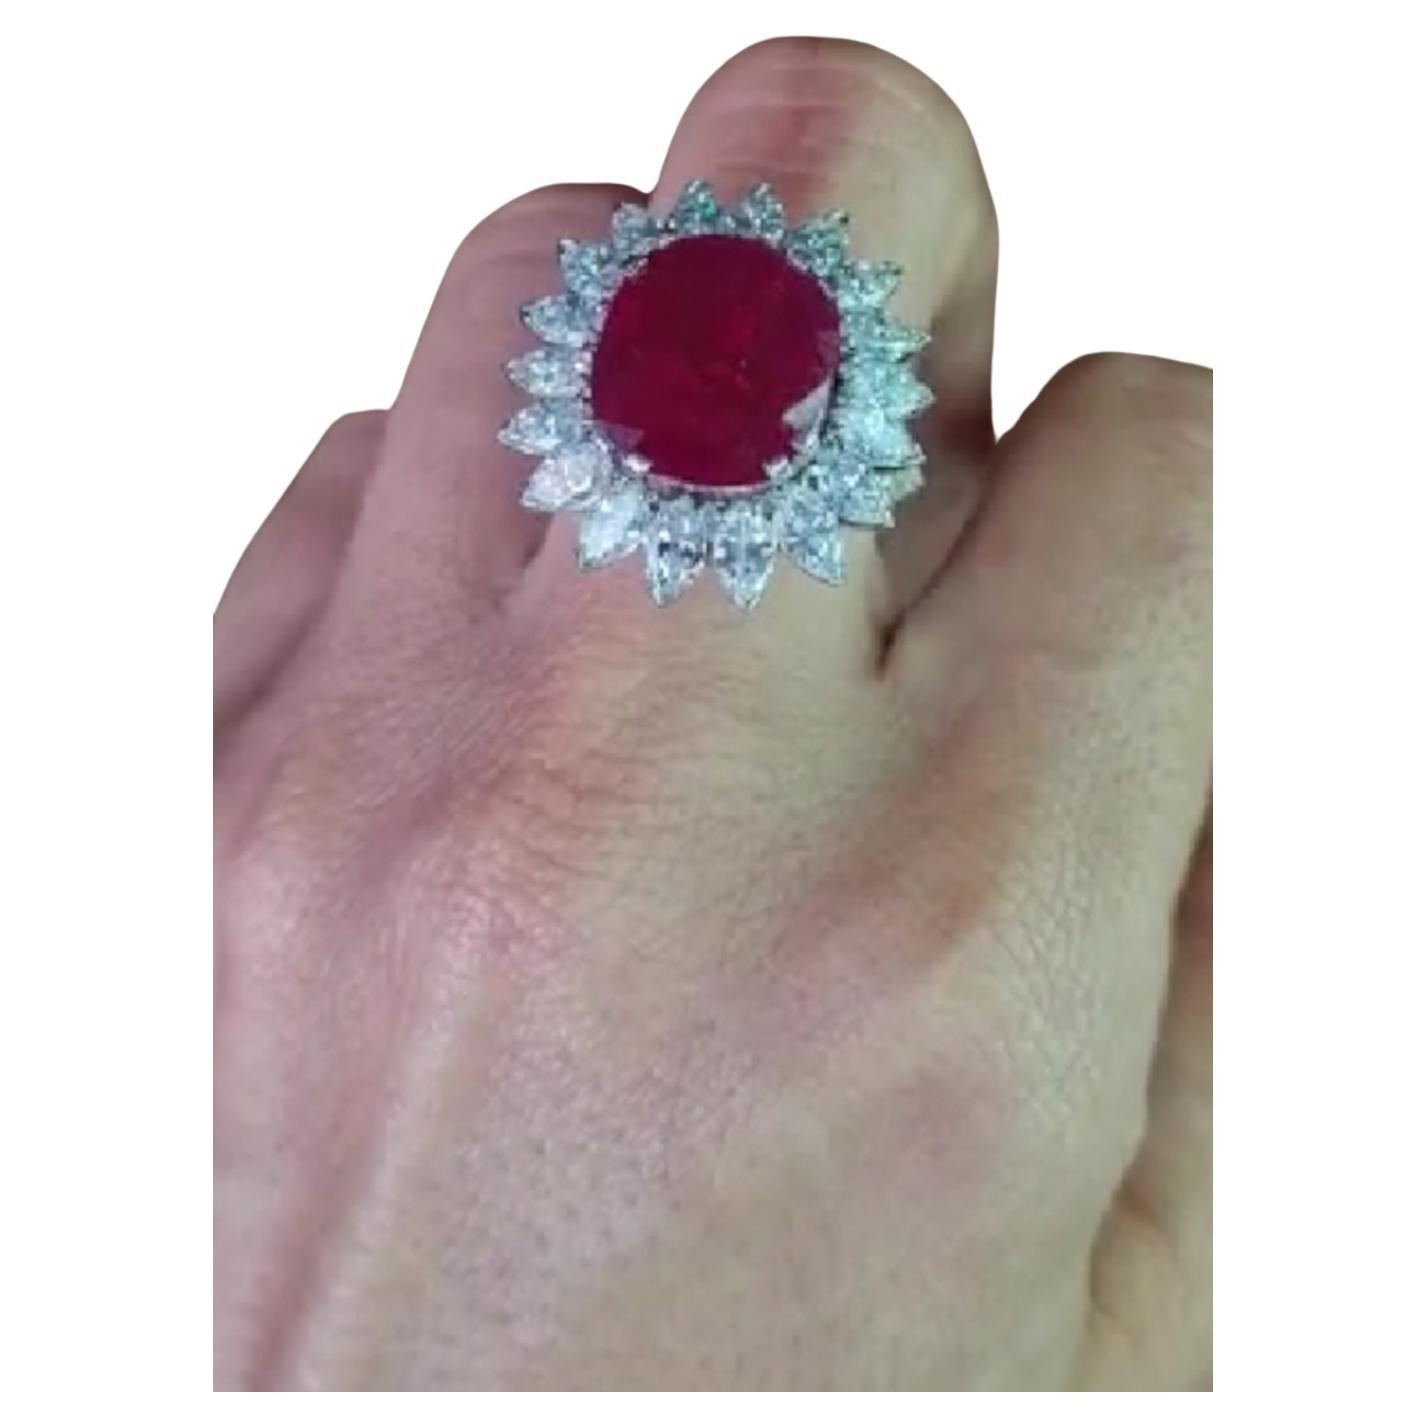 Unheated 4 carat Red Ruby from Mozambique

Mozambique has long been recognized as the location associated with very desirable rubies in the world.

The Ruby is surrounded by marquise brilliant cut diamonds weighing a total of 2.70 carats plus 1.20